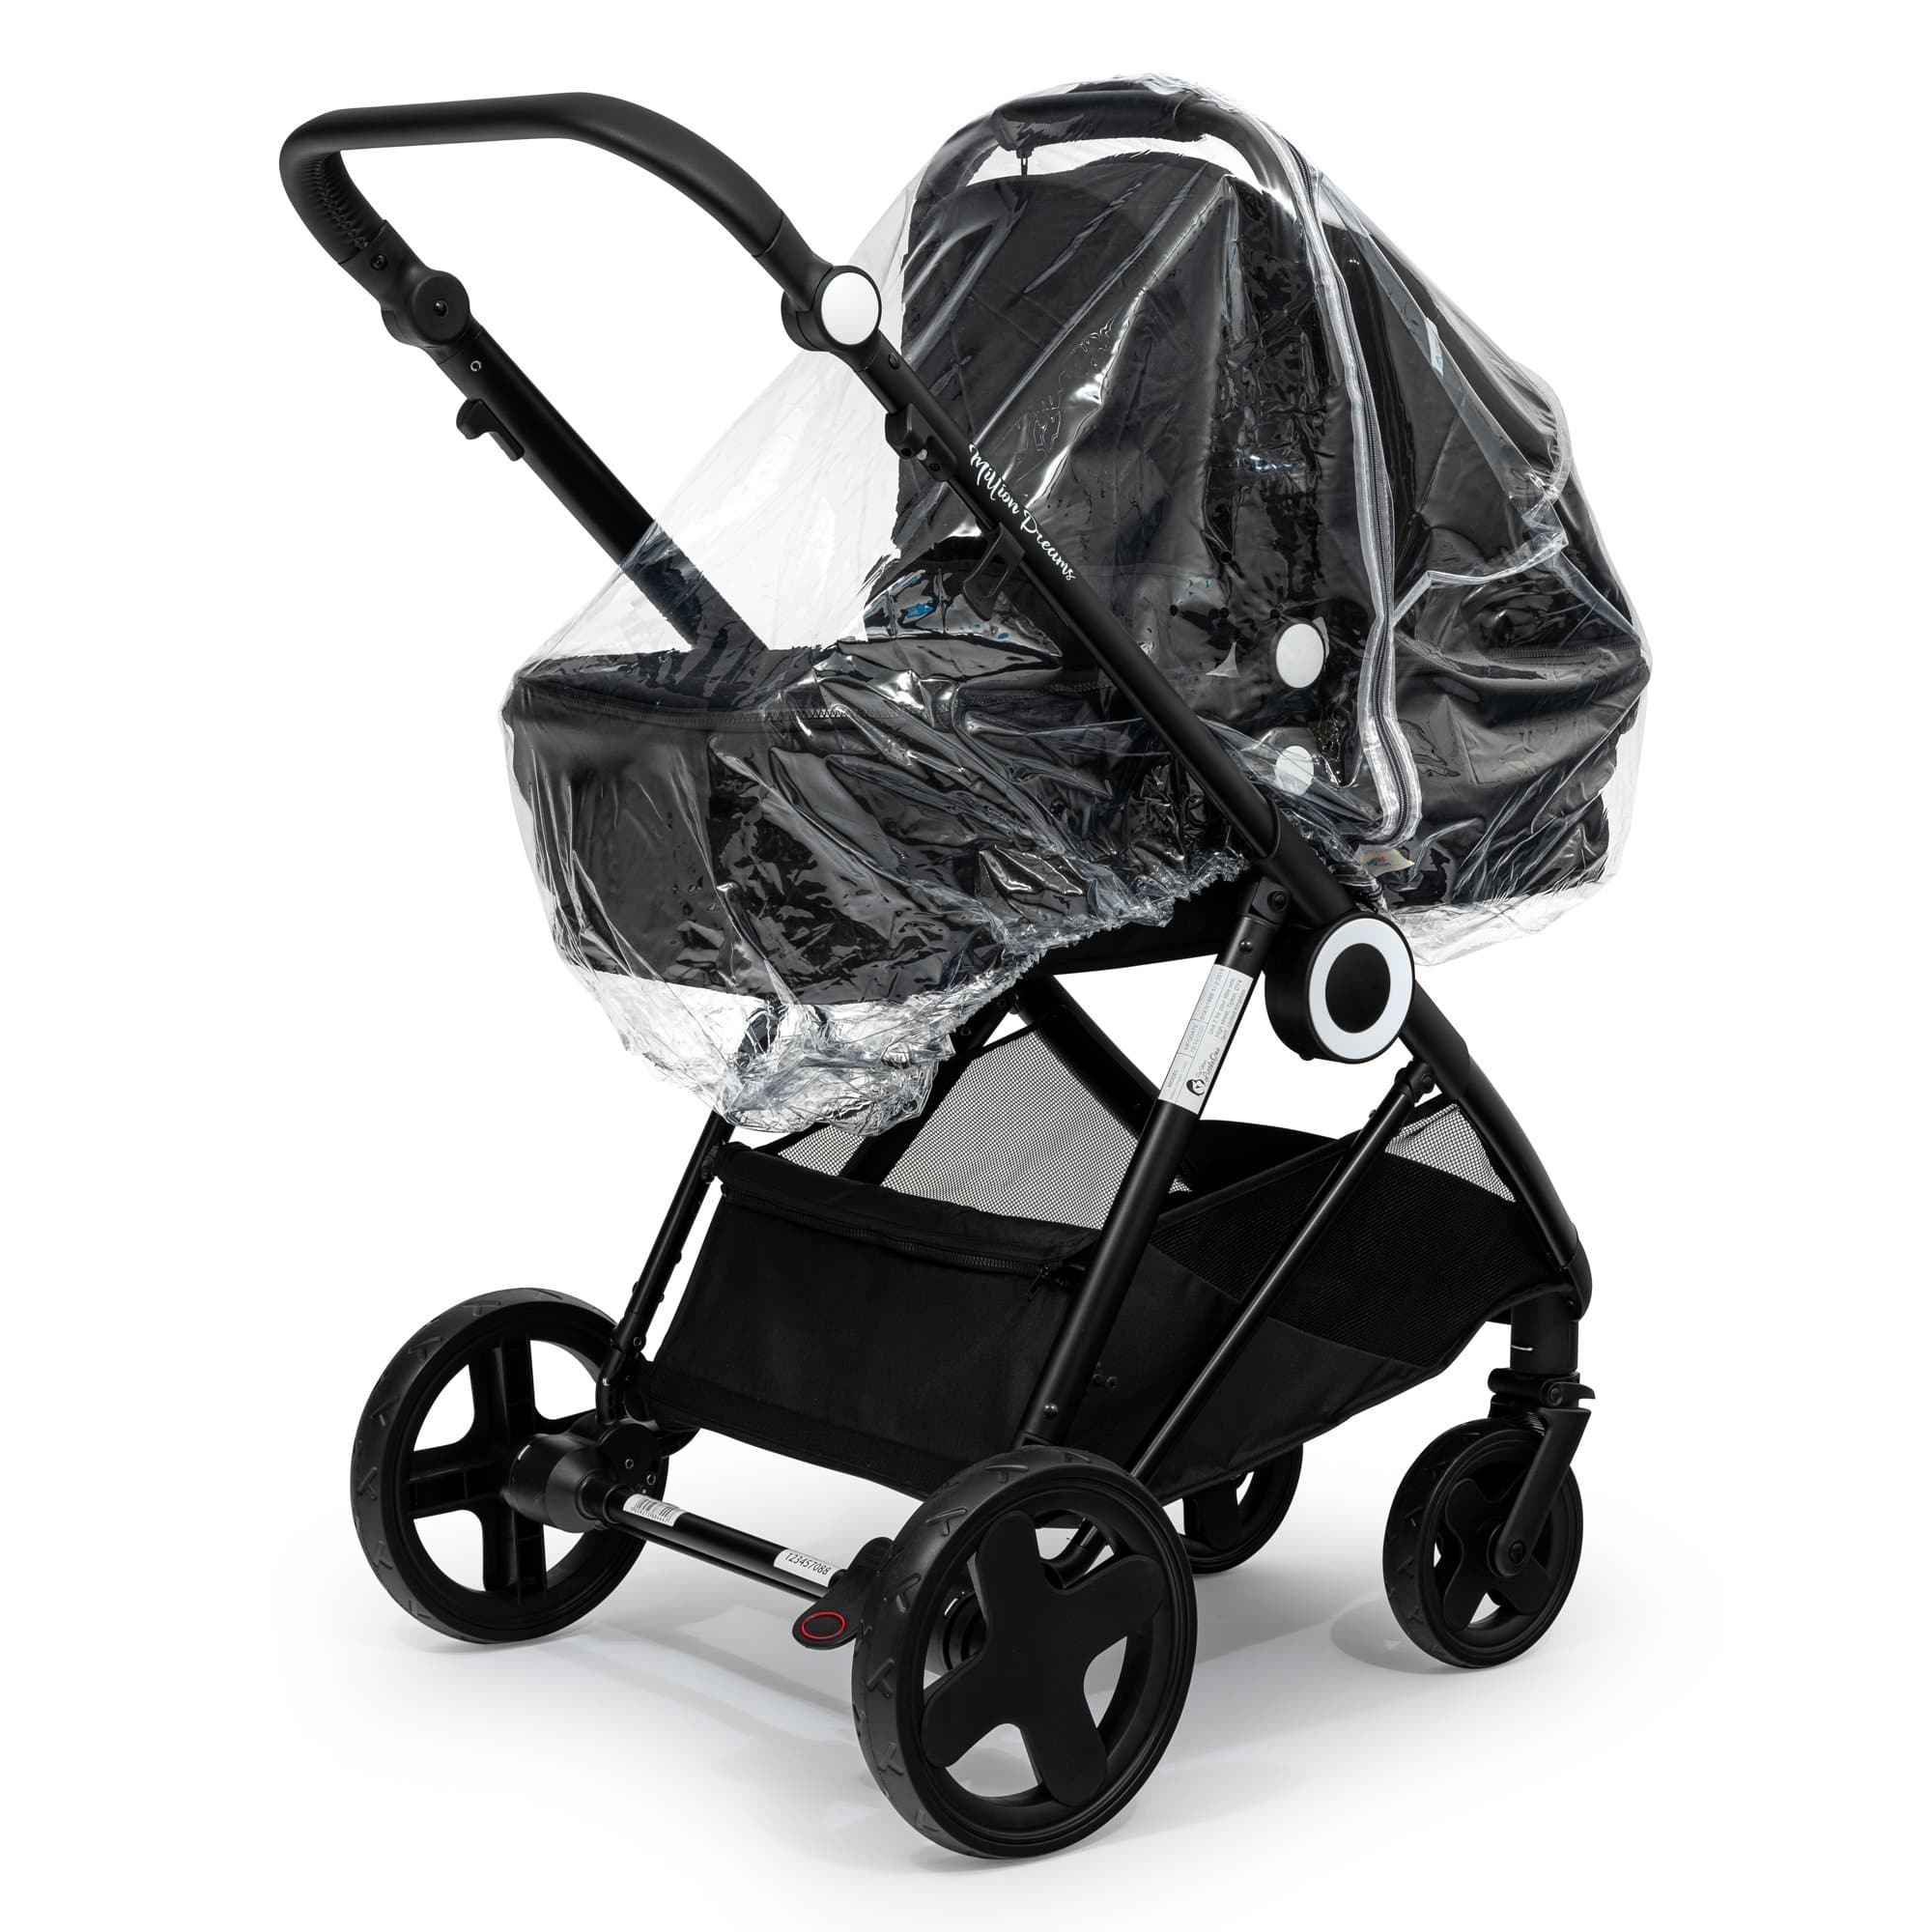 2 in 1 Rain Cover Compatible with Baby Trend - Fits All Models - For Your Little One